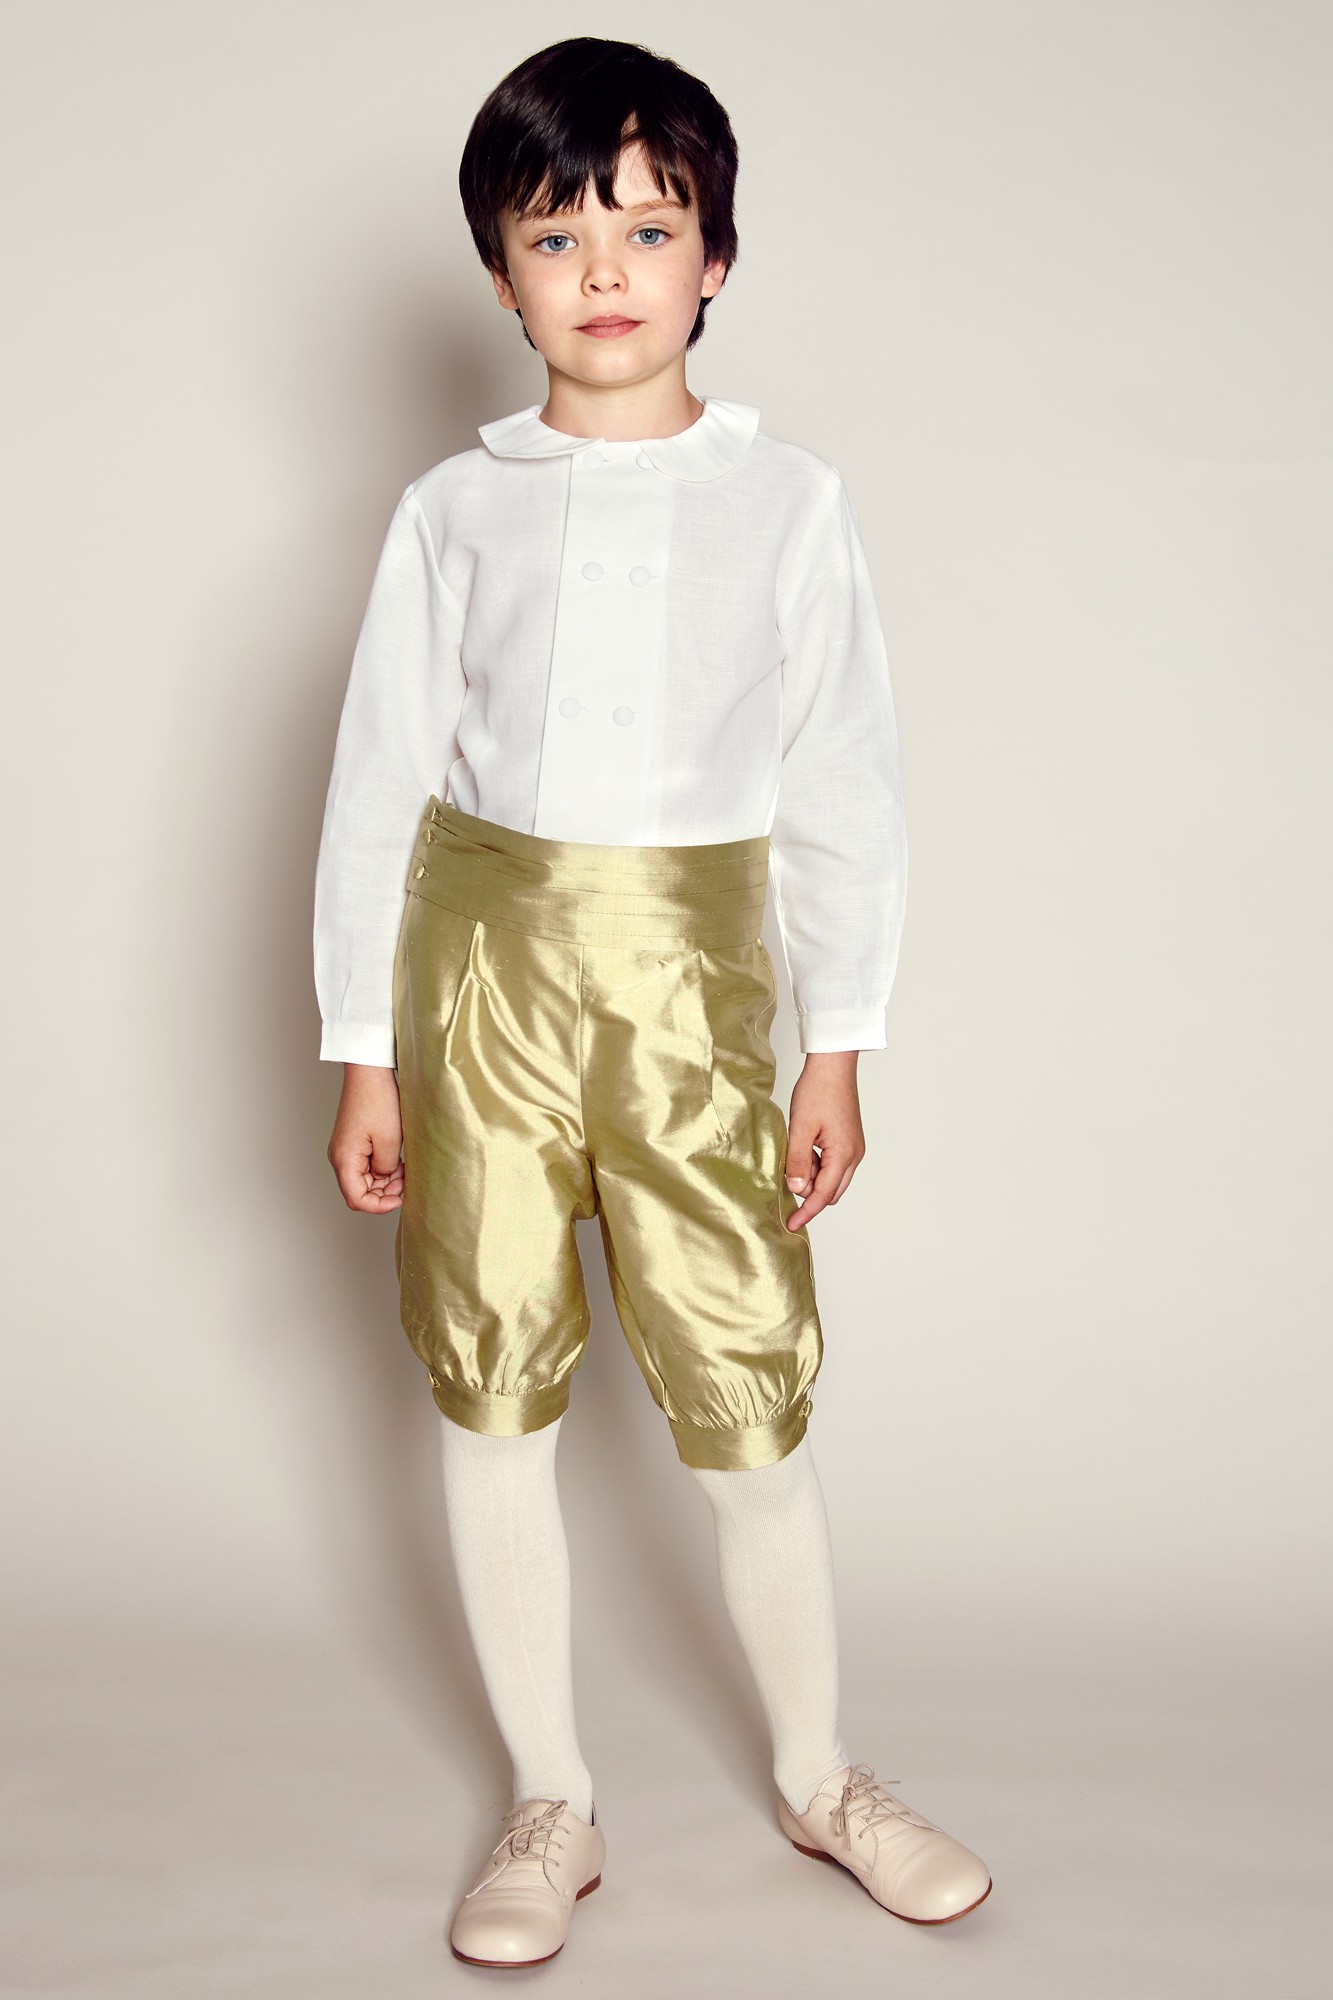 Pepe & Co Prince George pageboy outfit